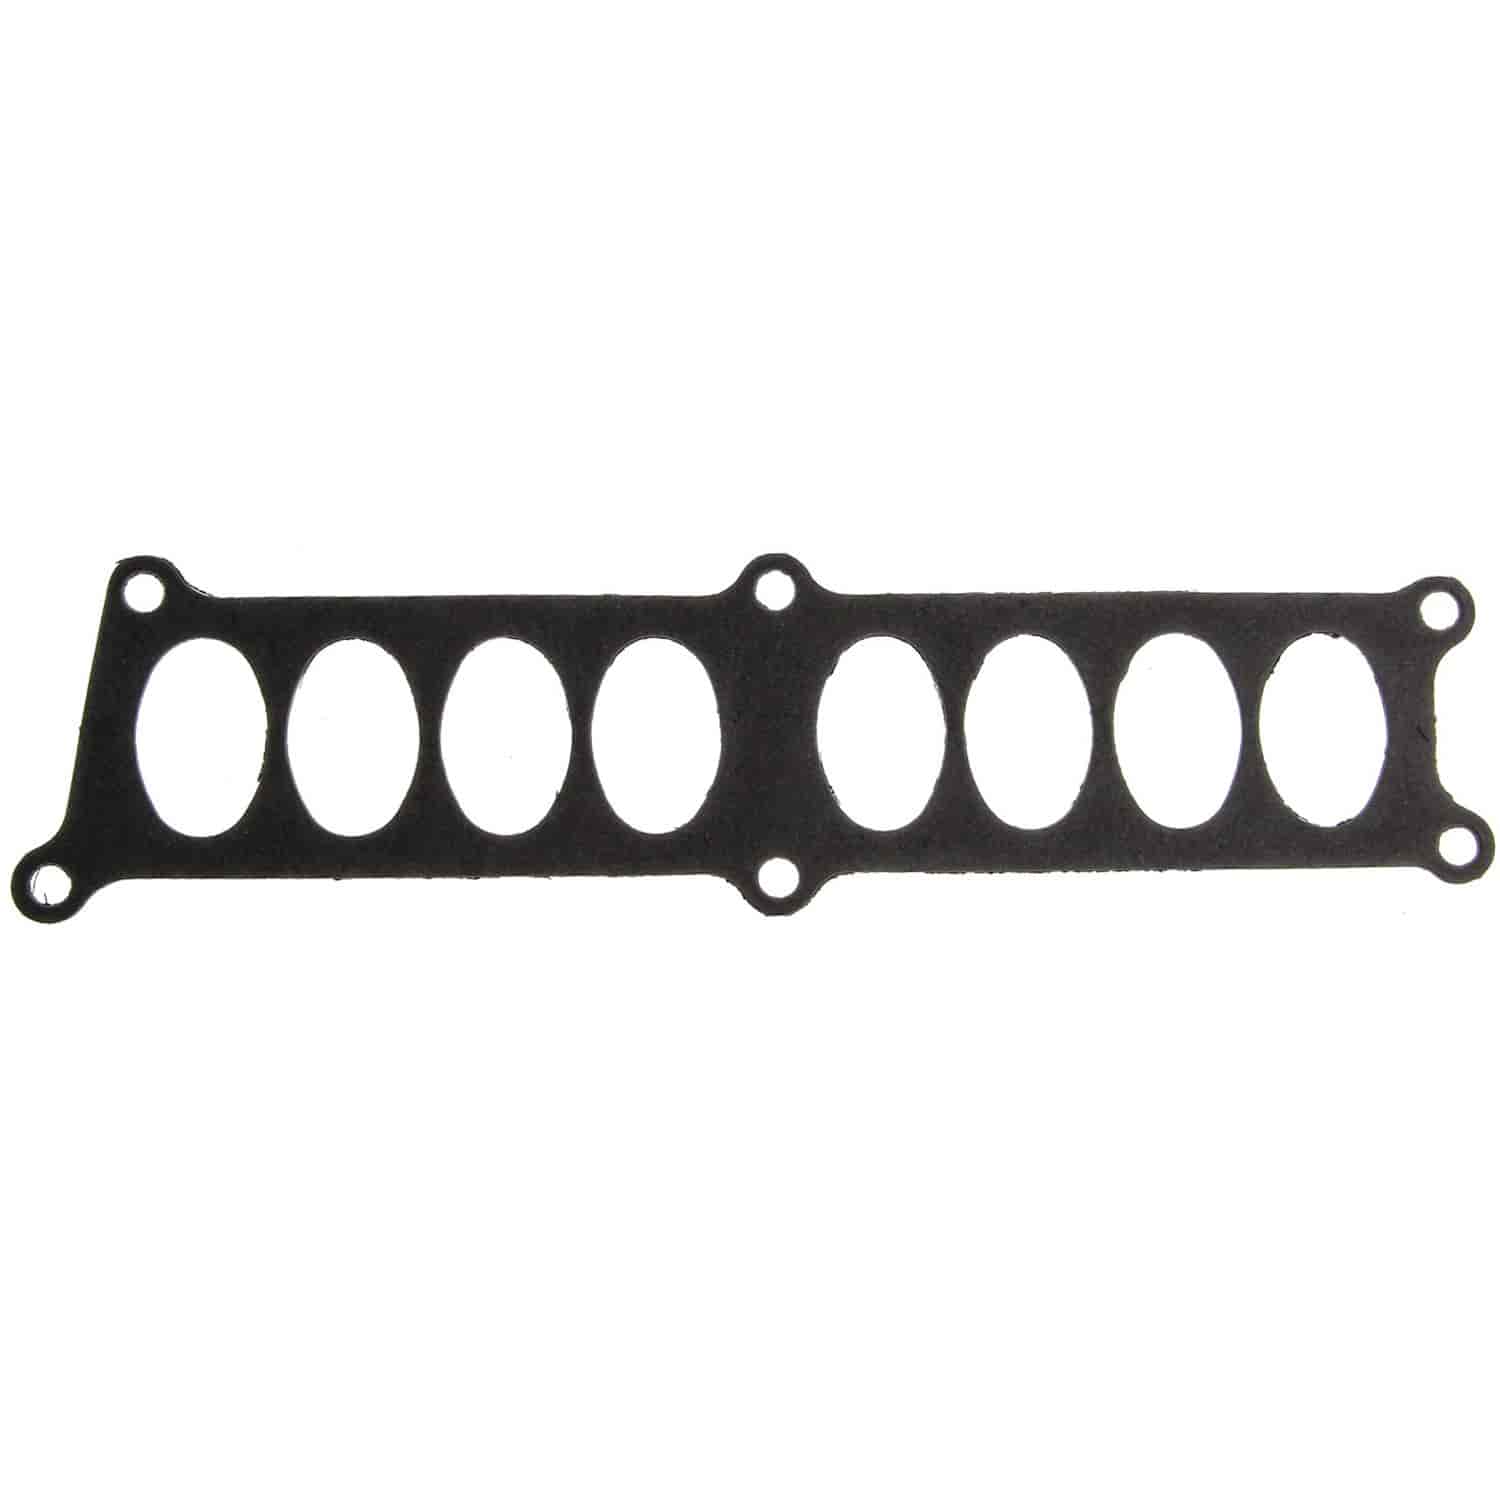 Fuel Injection Plenum Gasket 1988-1997 Small Block Ford